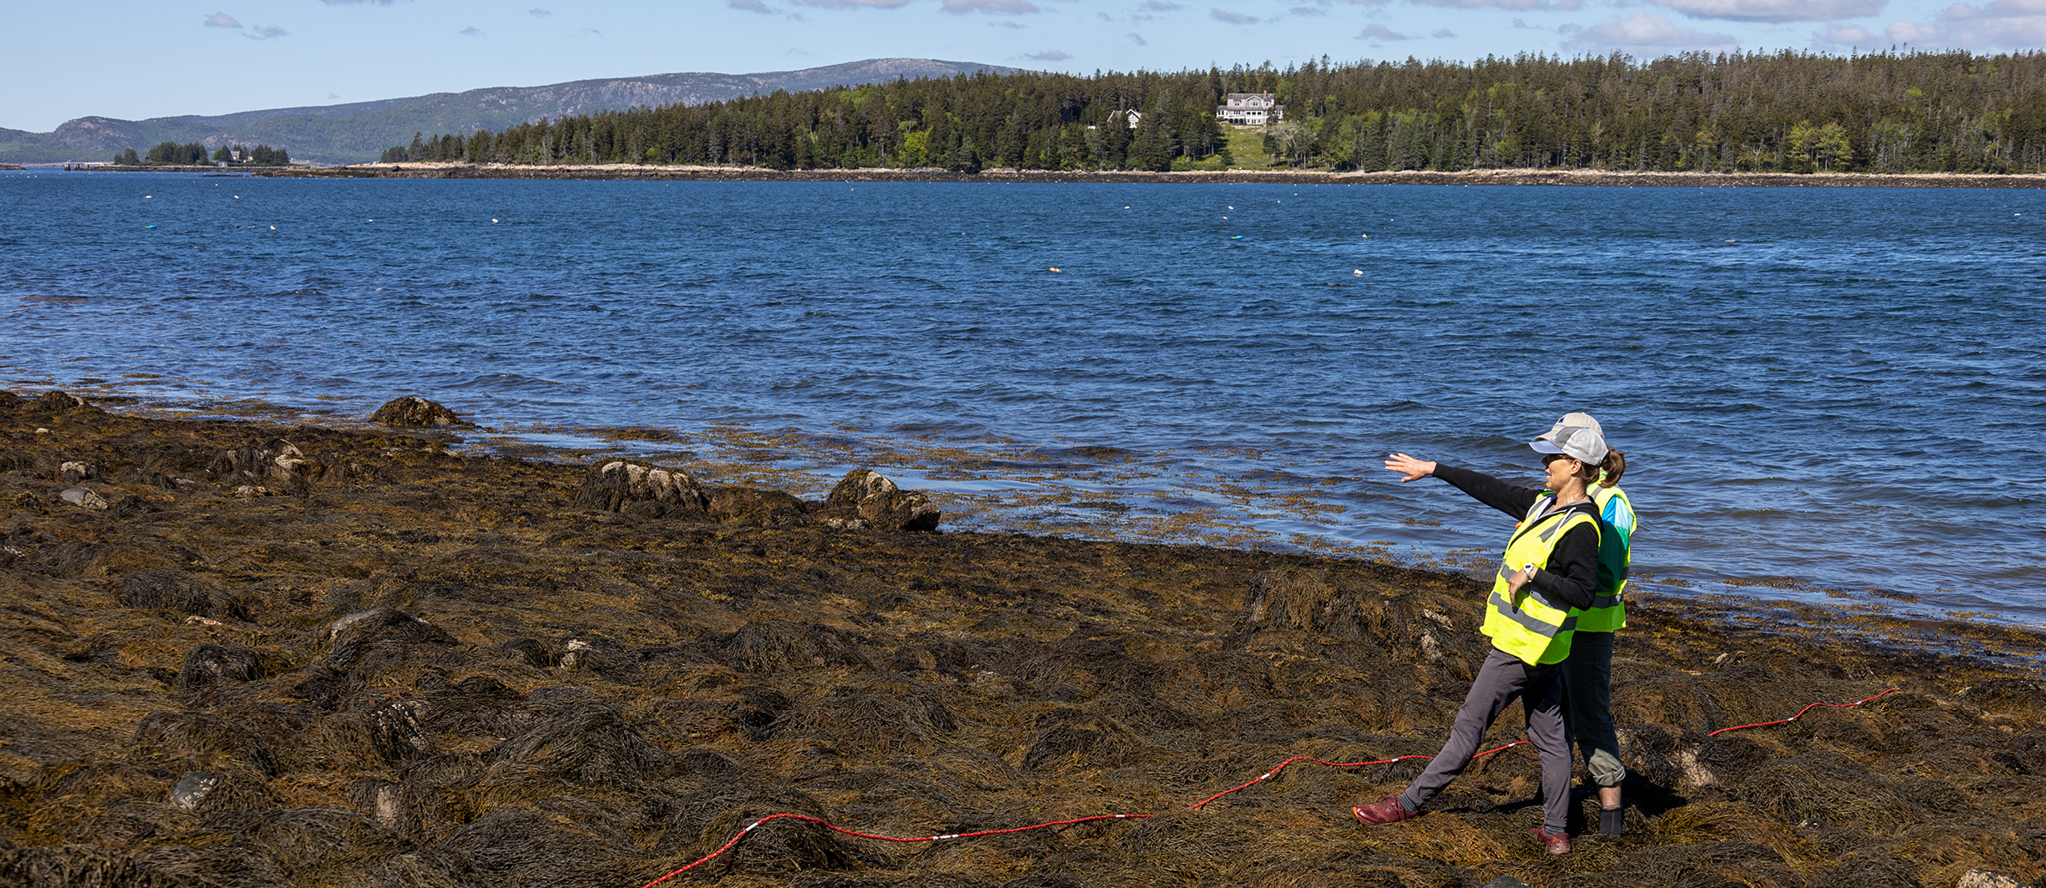 Researchers in the intertidal zone observe and survey the seaweed at low tide on the Schoodic Peninsula.